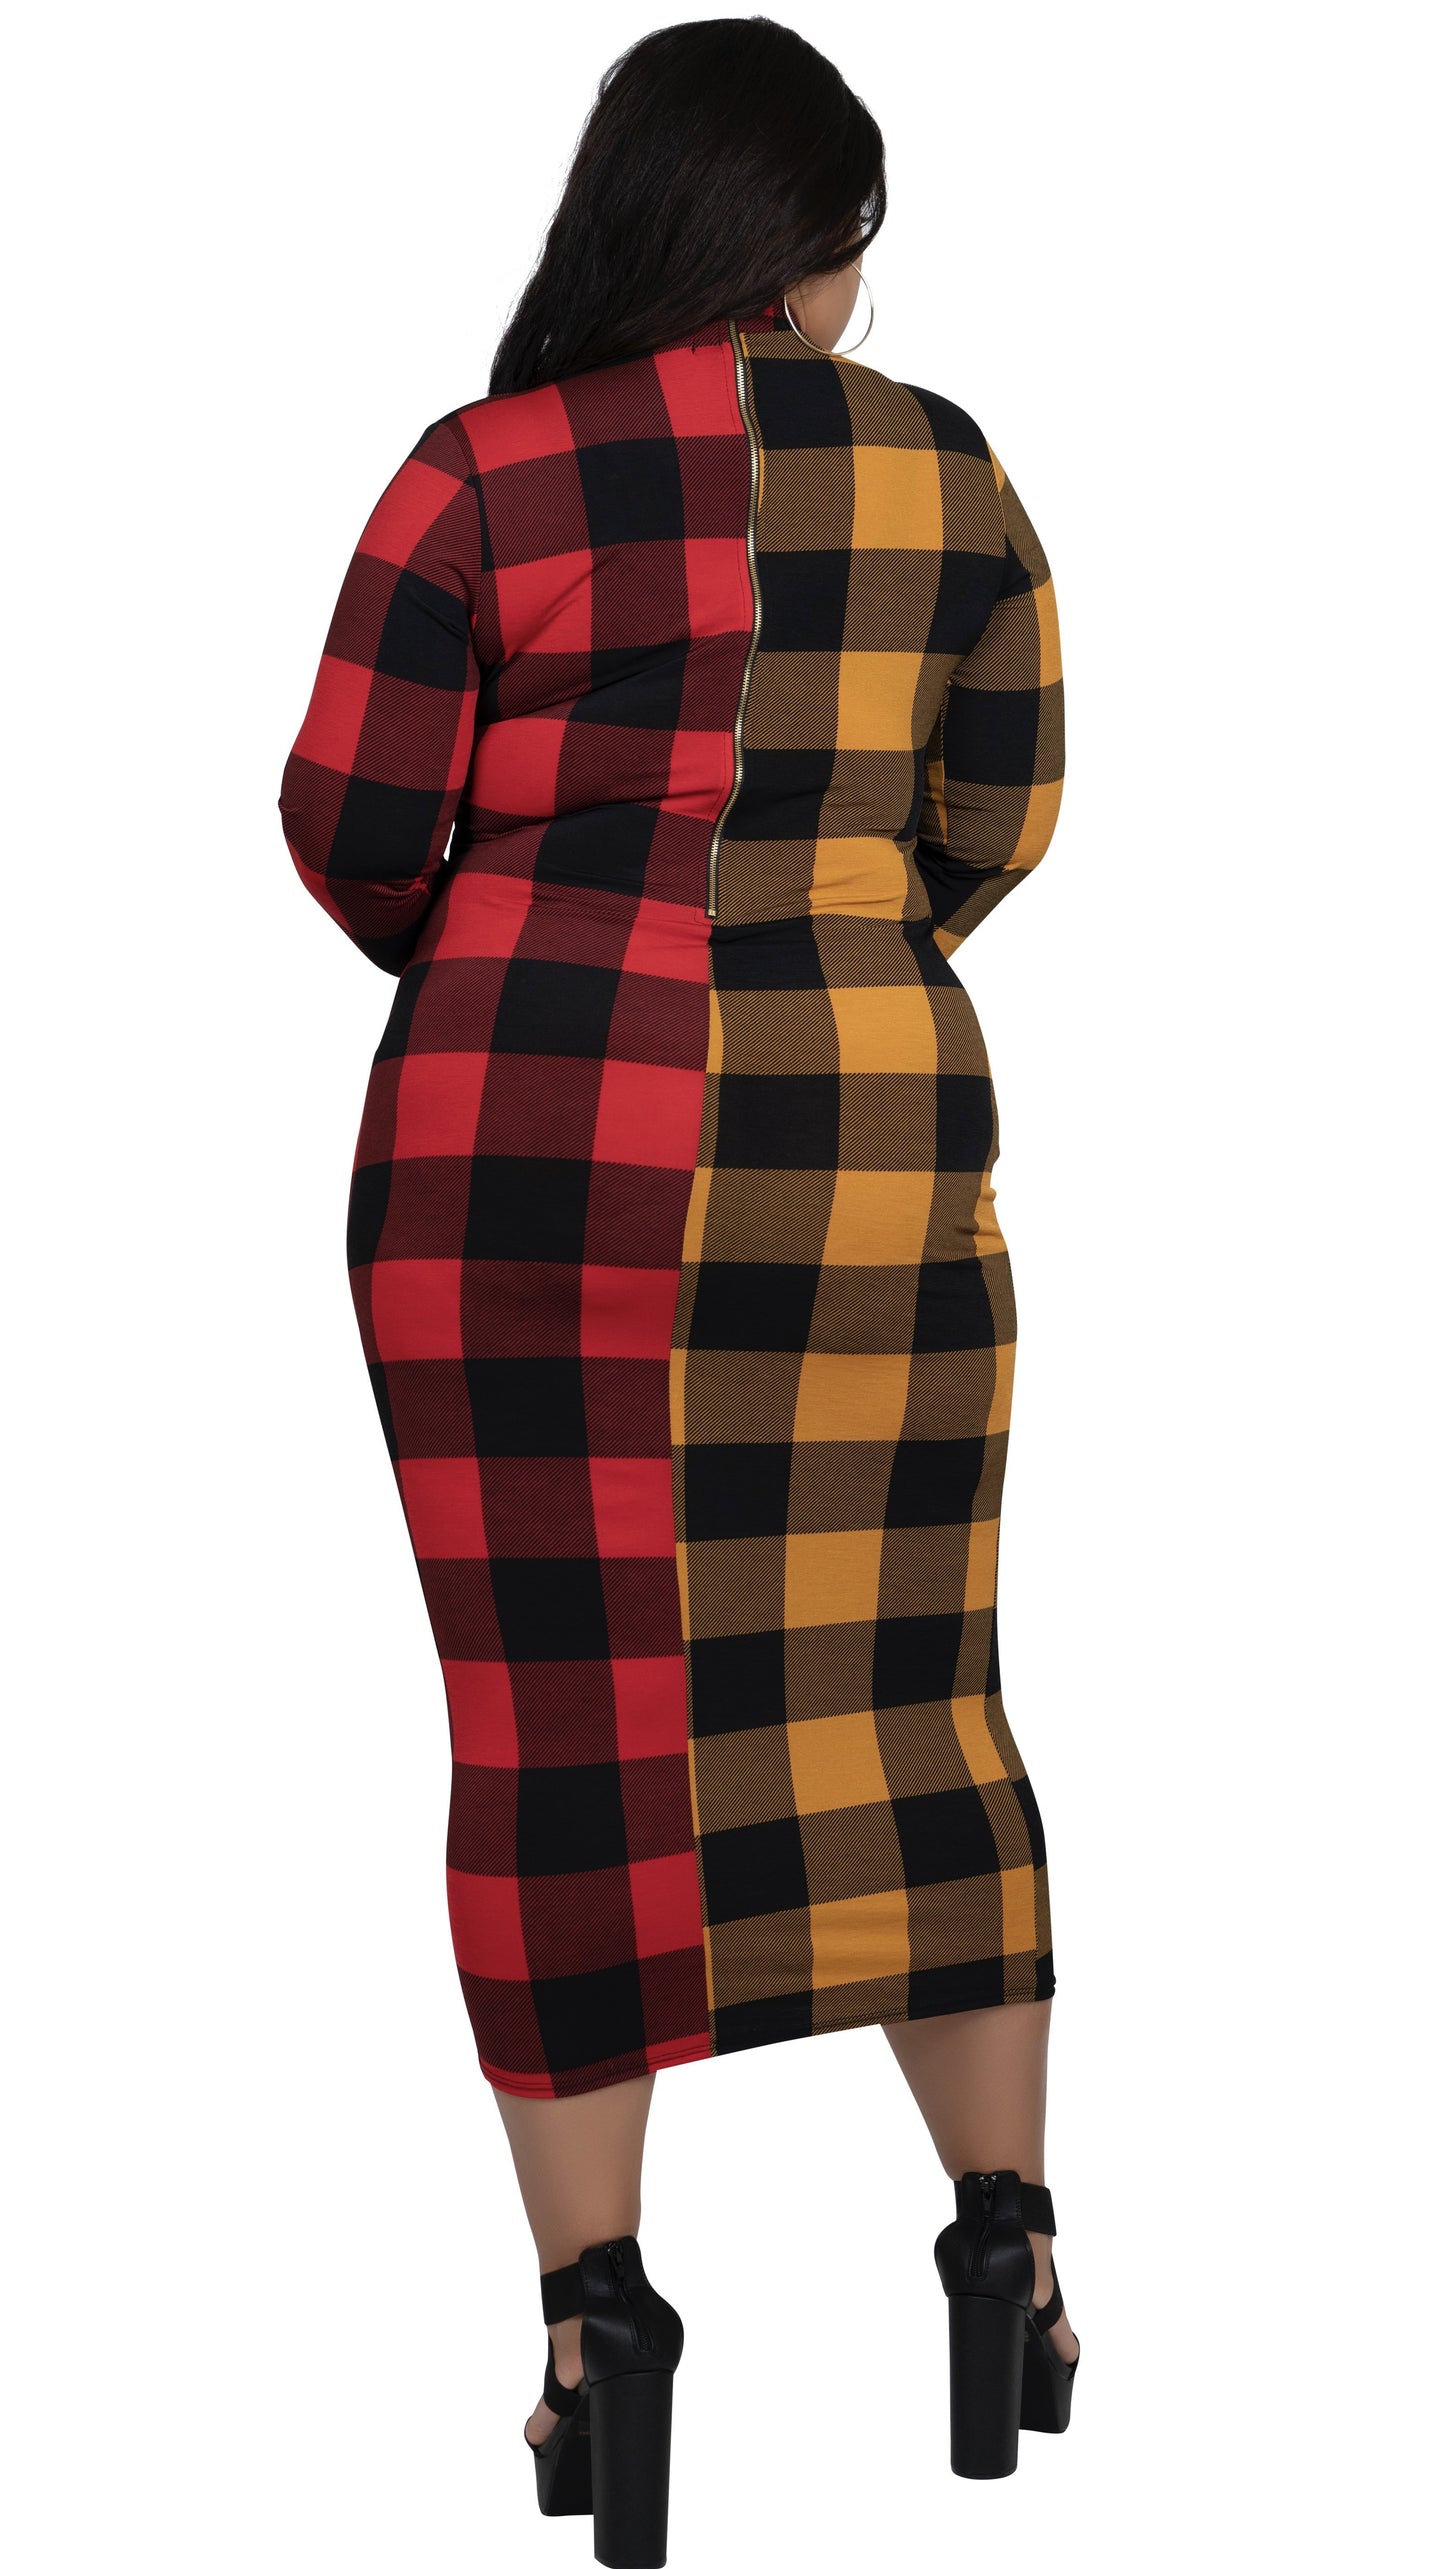 Best Of Both Worlds Dress (Red/Mustard Plaid)-Dresses-Boughie-Boughie